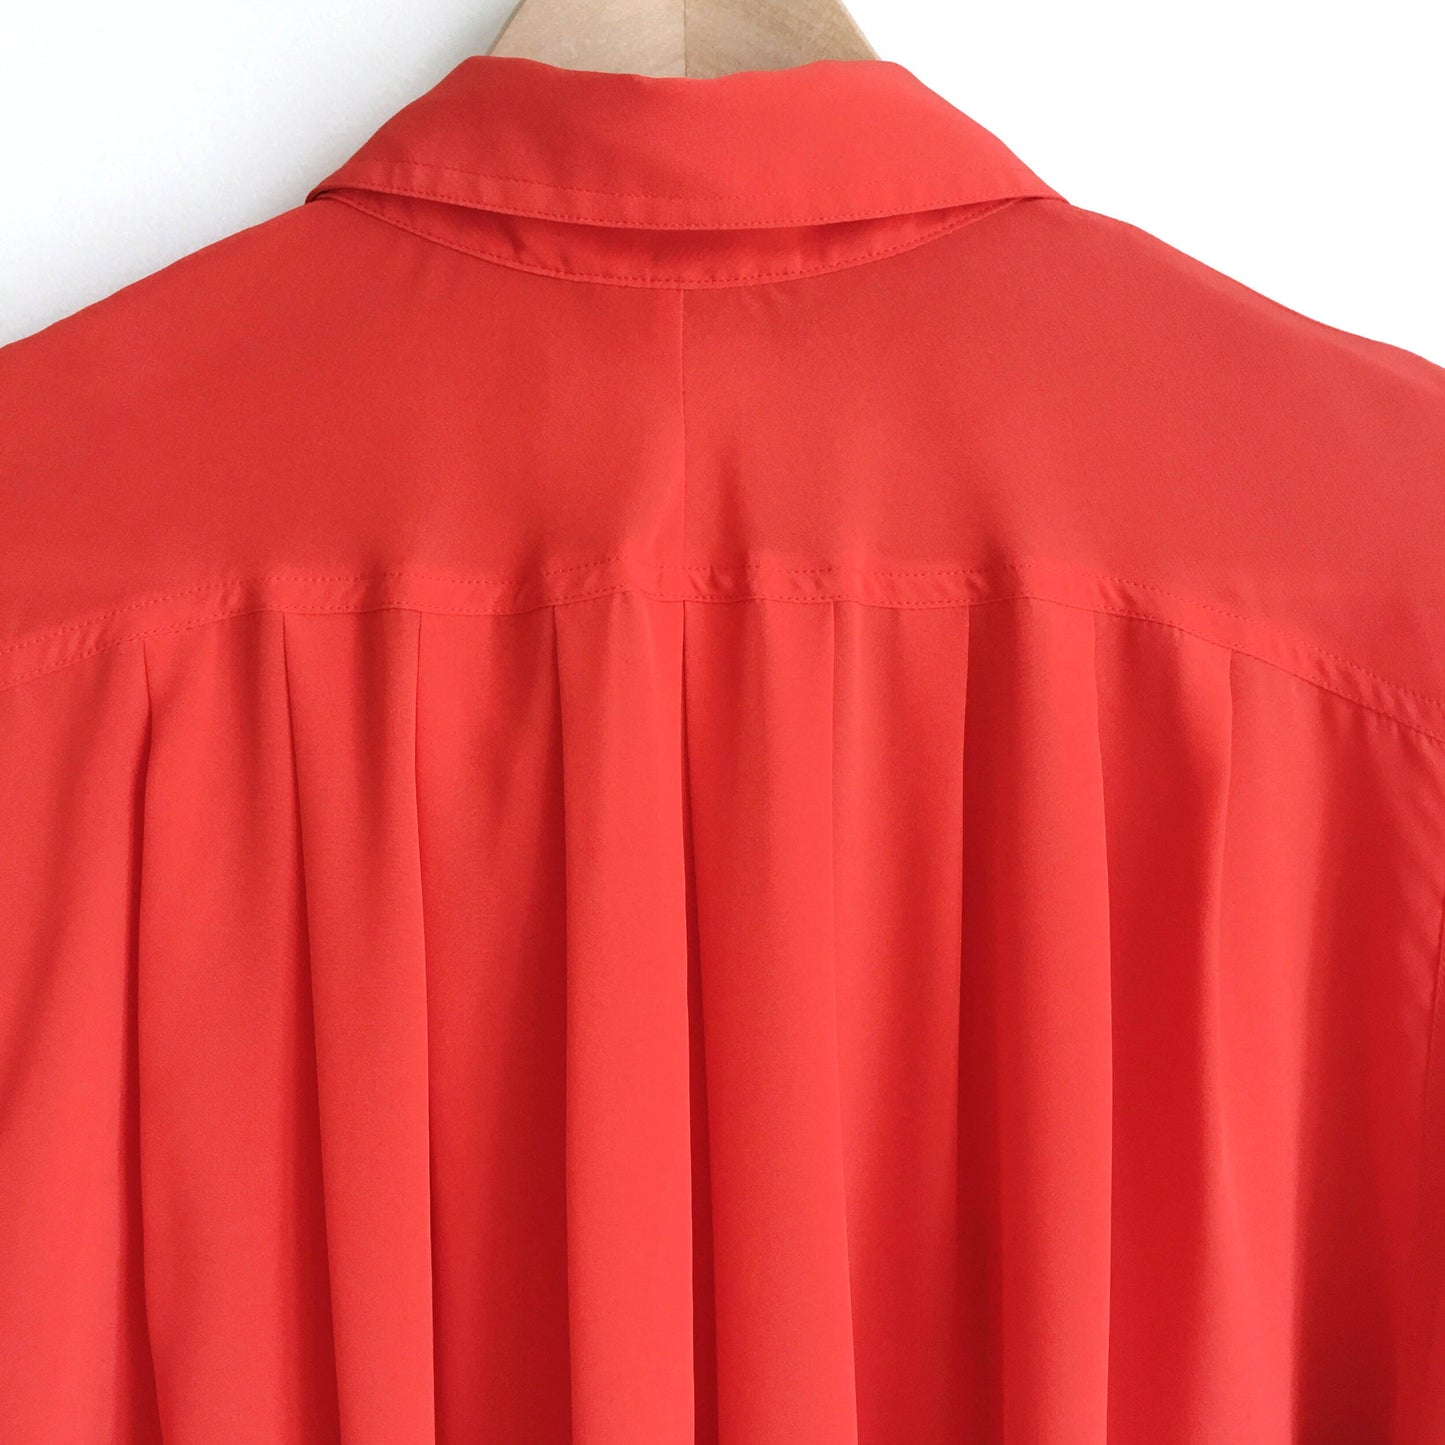 Vintage red blouse with pearl collar - size 14